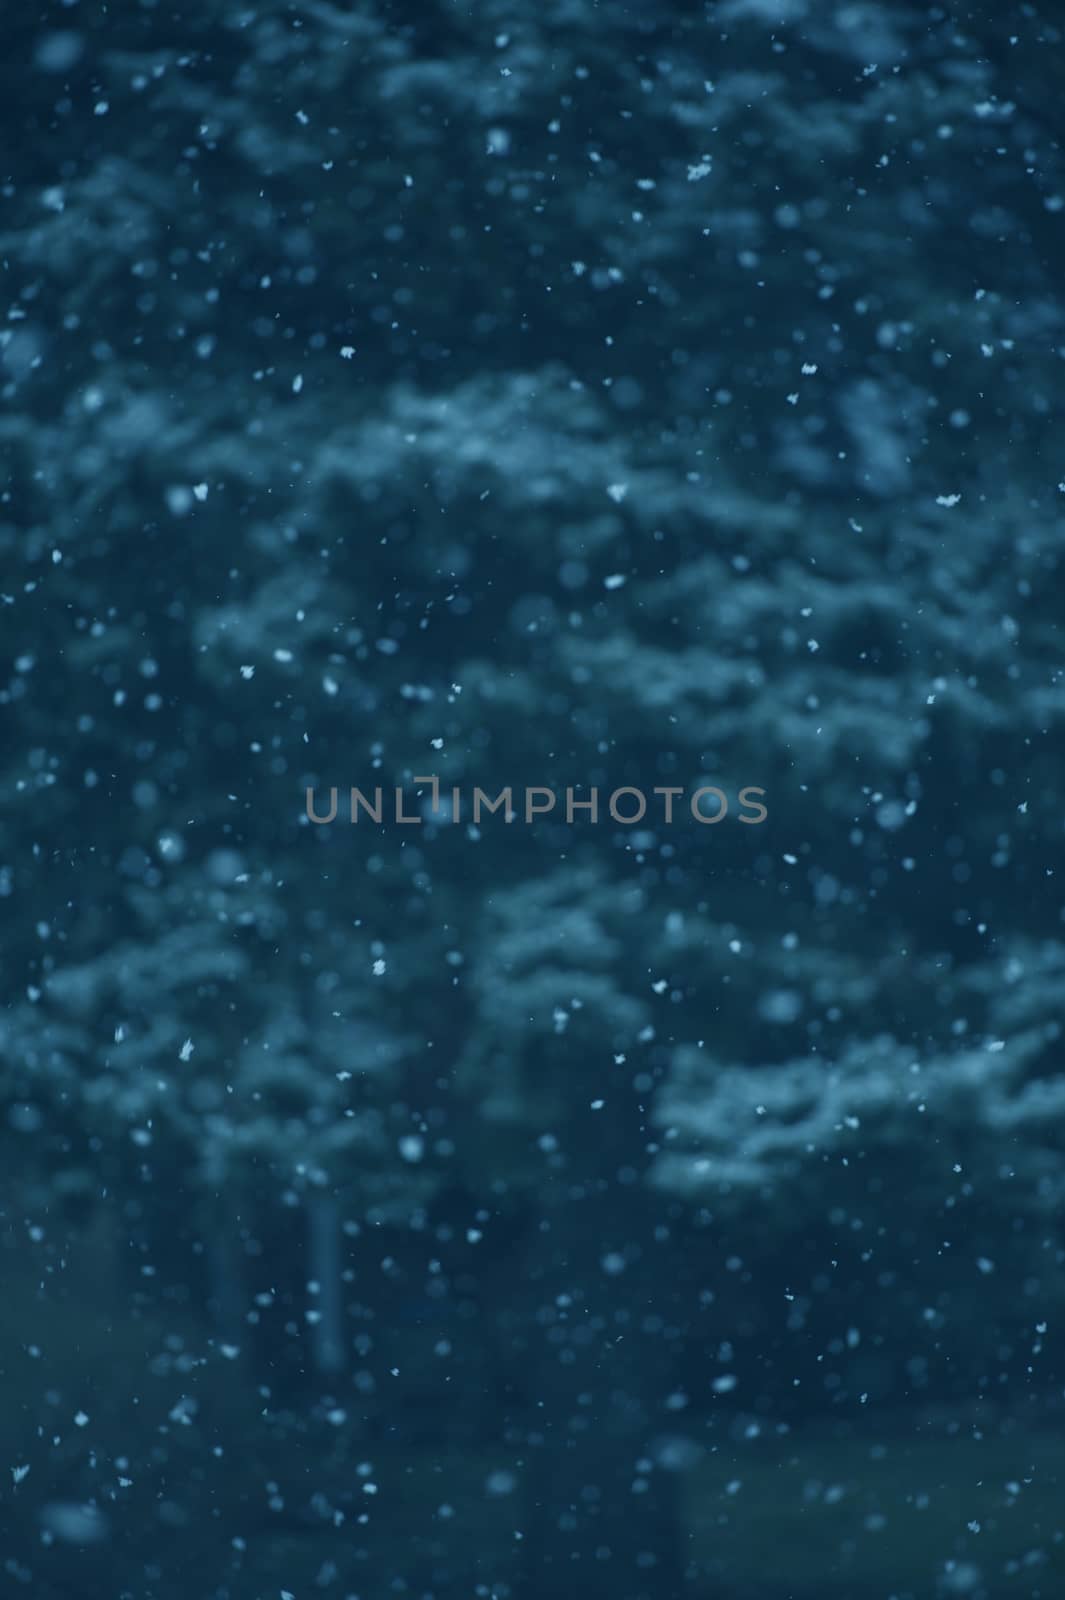 Falling Snow - Real Snow Flakes Photo Background.